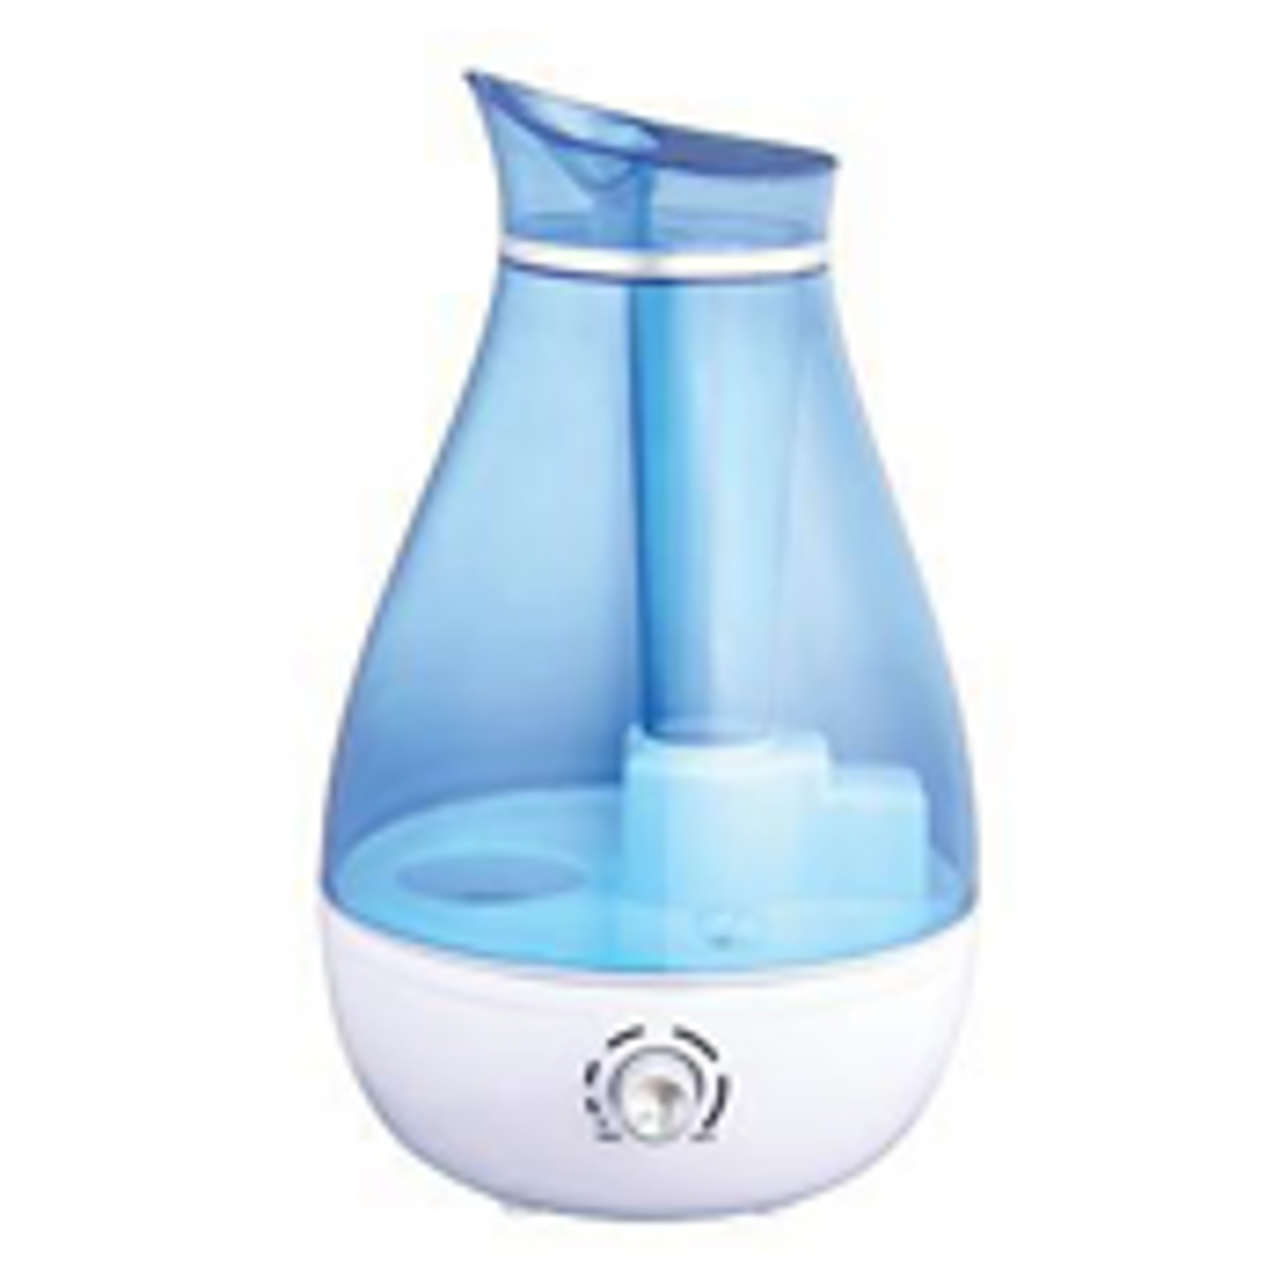 Shop Room Humidifiers | New Leaf Home Medical